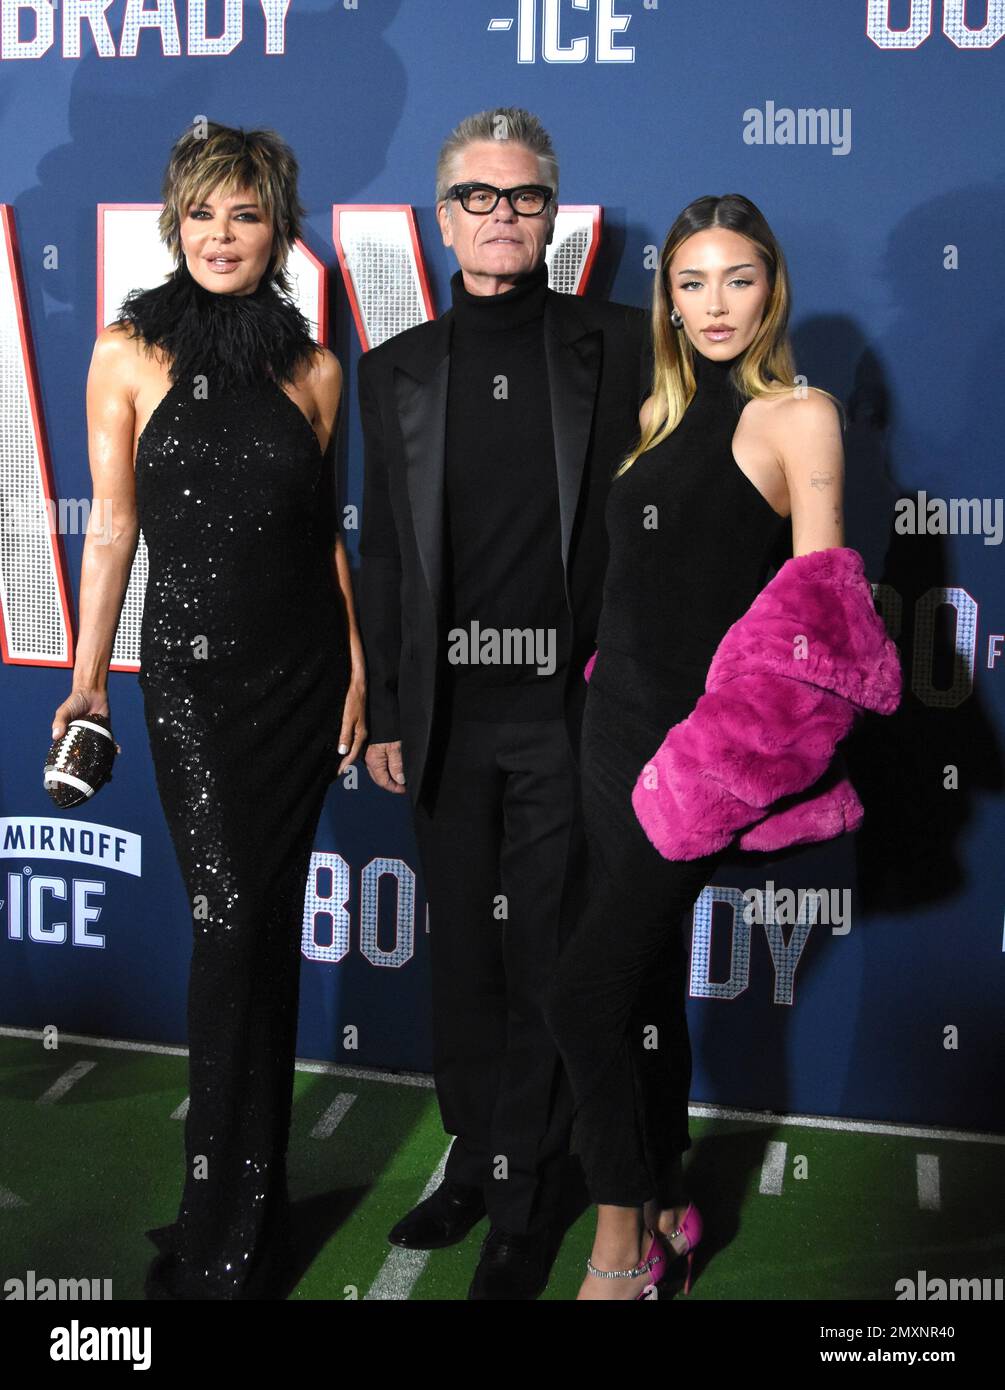 Los Angeles, California, USA 31st January 2023 Actress Lisa Rinna, Actor Harry Hamlin and daughter Actress Delilah Belle Hamlin attend the Los Angeles Premiere Screening of Paramount Pictures' '80 for Brady' at Regency Village Theatre on January 31, 2023 in Los Angeles, California, USA. Photo by Barry King/Alamy Stock Photo Stock Photo